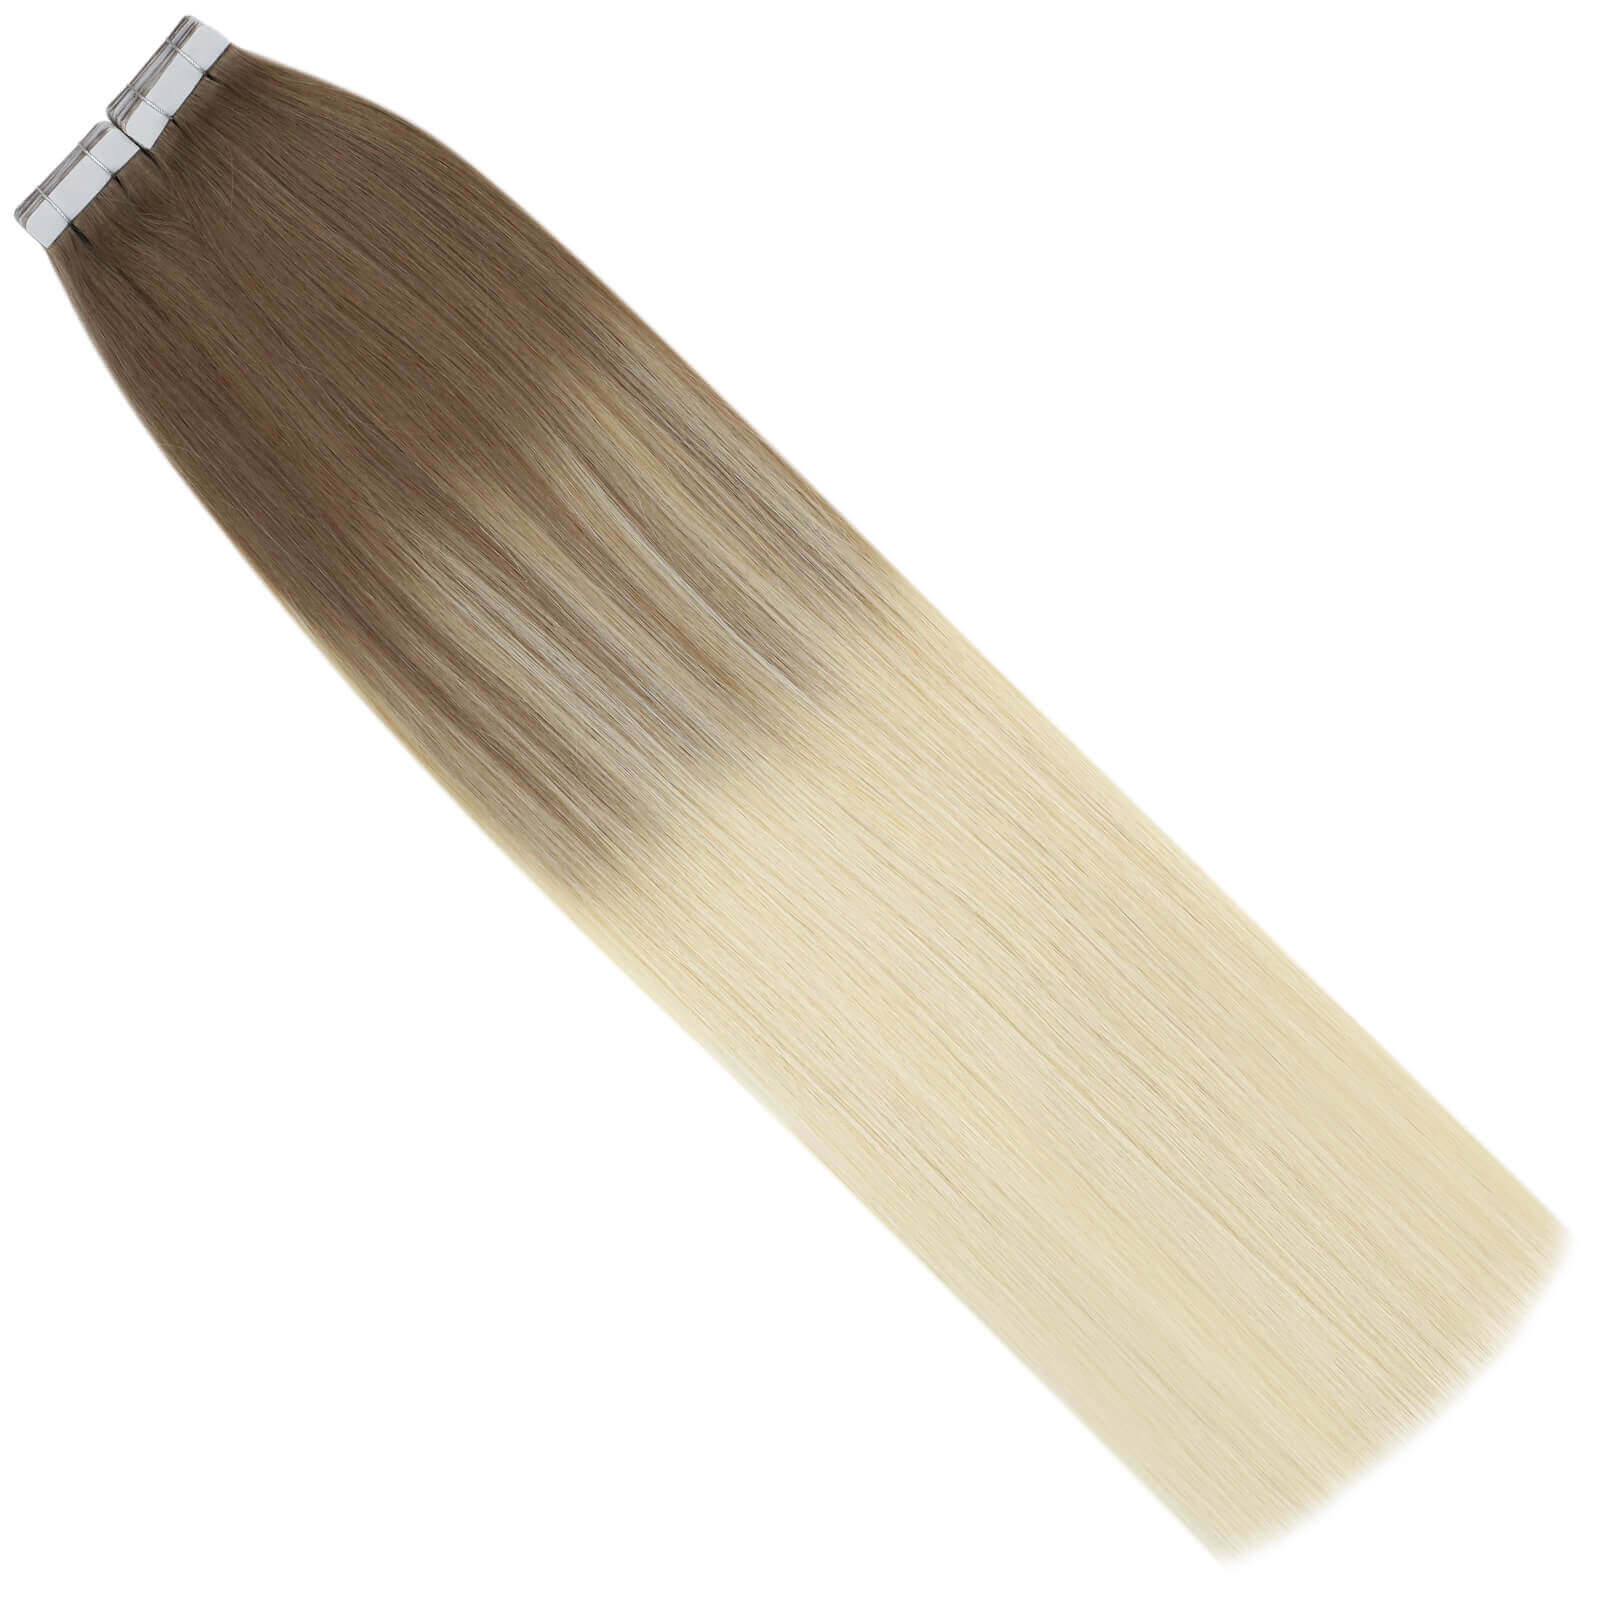 sunny hairextensions，tape in hair extension tape tape in extensions real hair tape in hair extensions tape ombre tape in hair extensions tape in real hair extensions